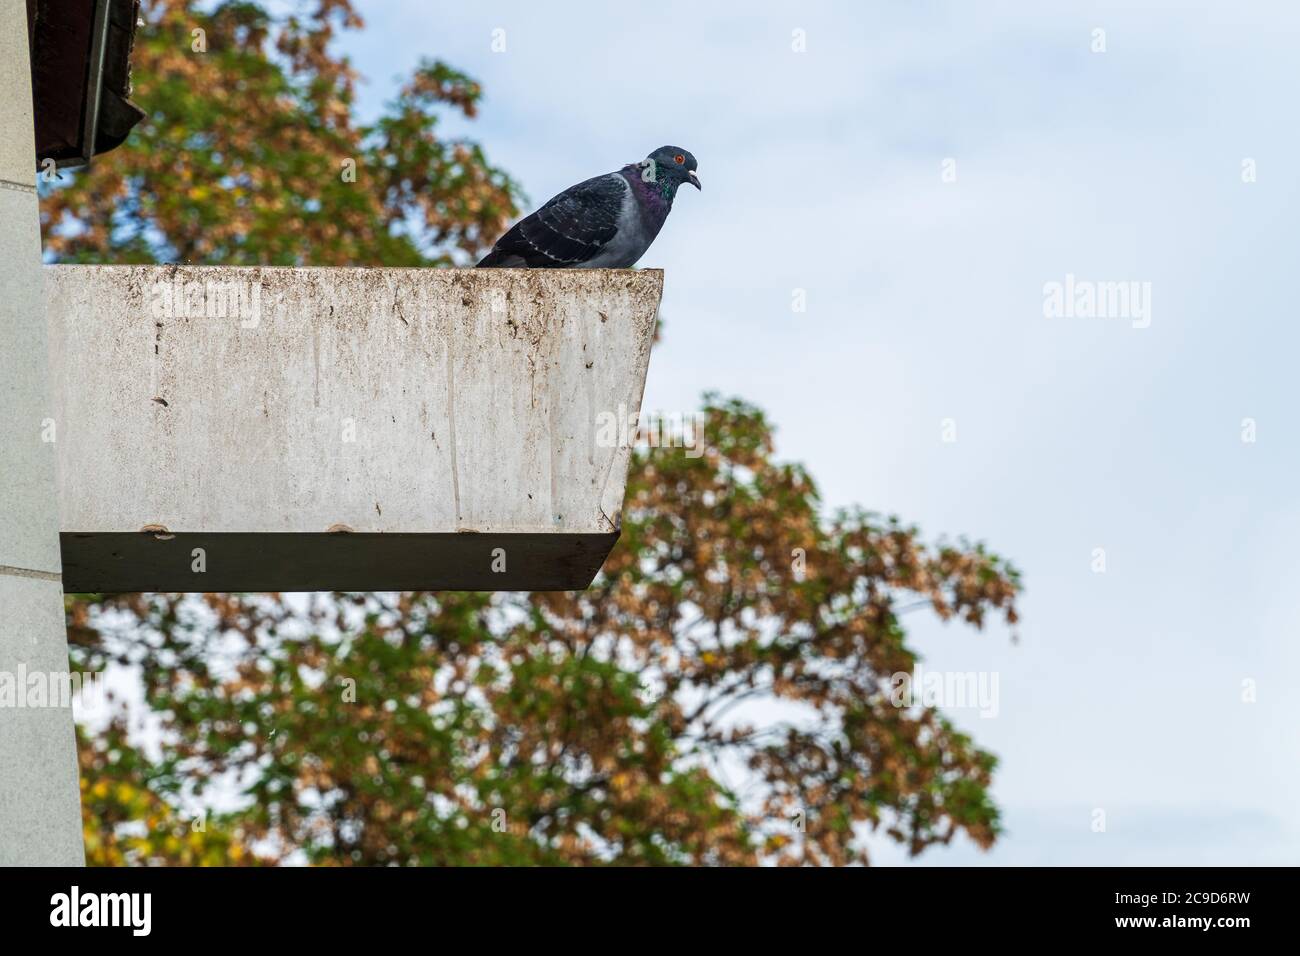 Feral pigeon sitting on the edge of a roof and looking down. City pigeons are considered pests and said to cause pollution in cities. Stock Photo